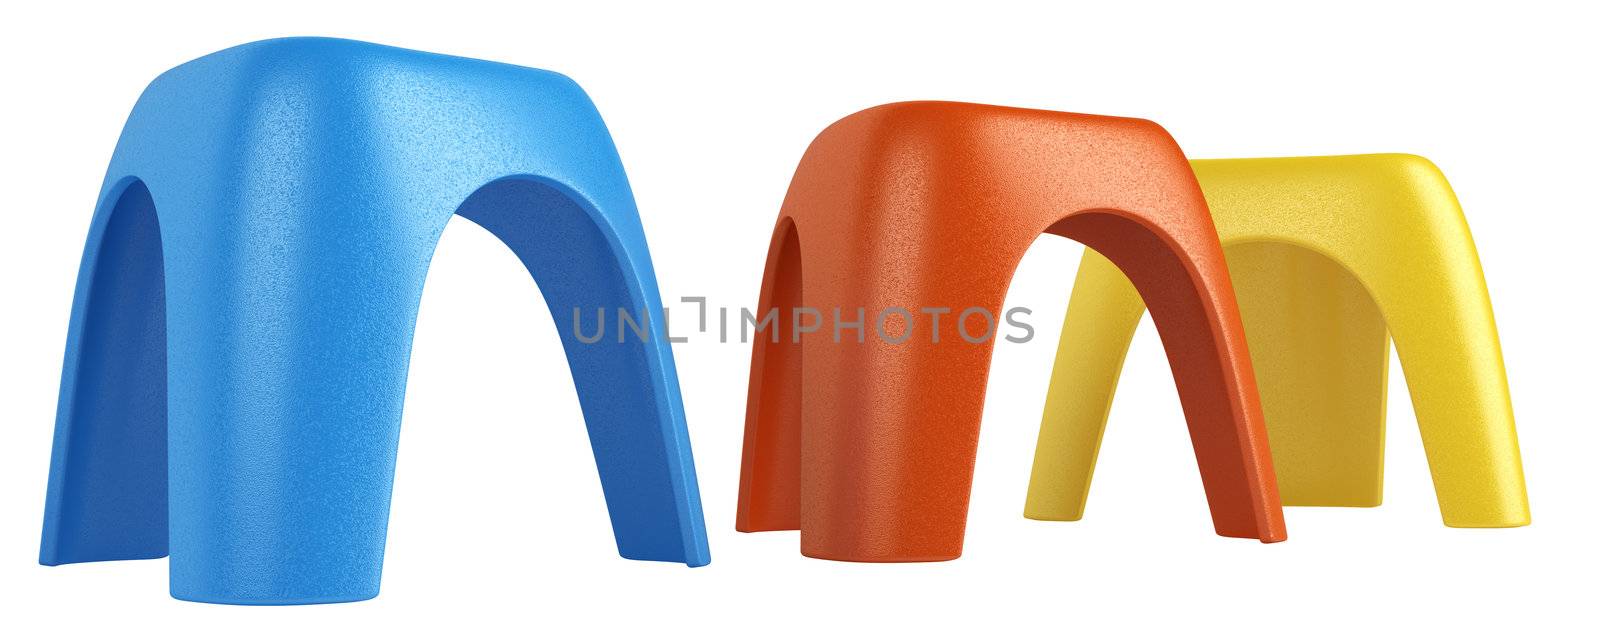 Three colourful modern modular stools in red, blue and yellow in a row with diminishing perspective isolated on a white background